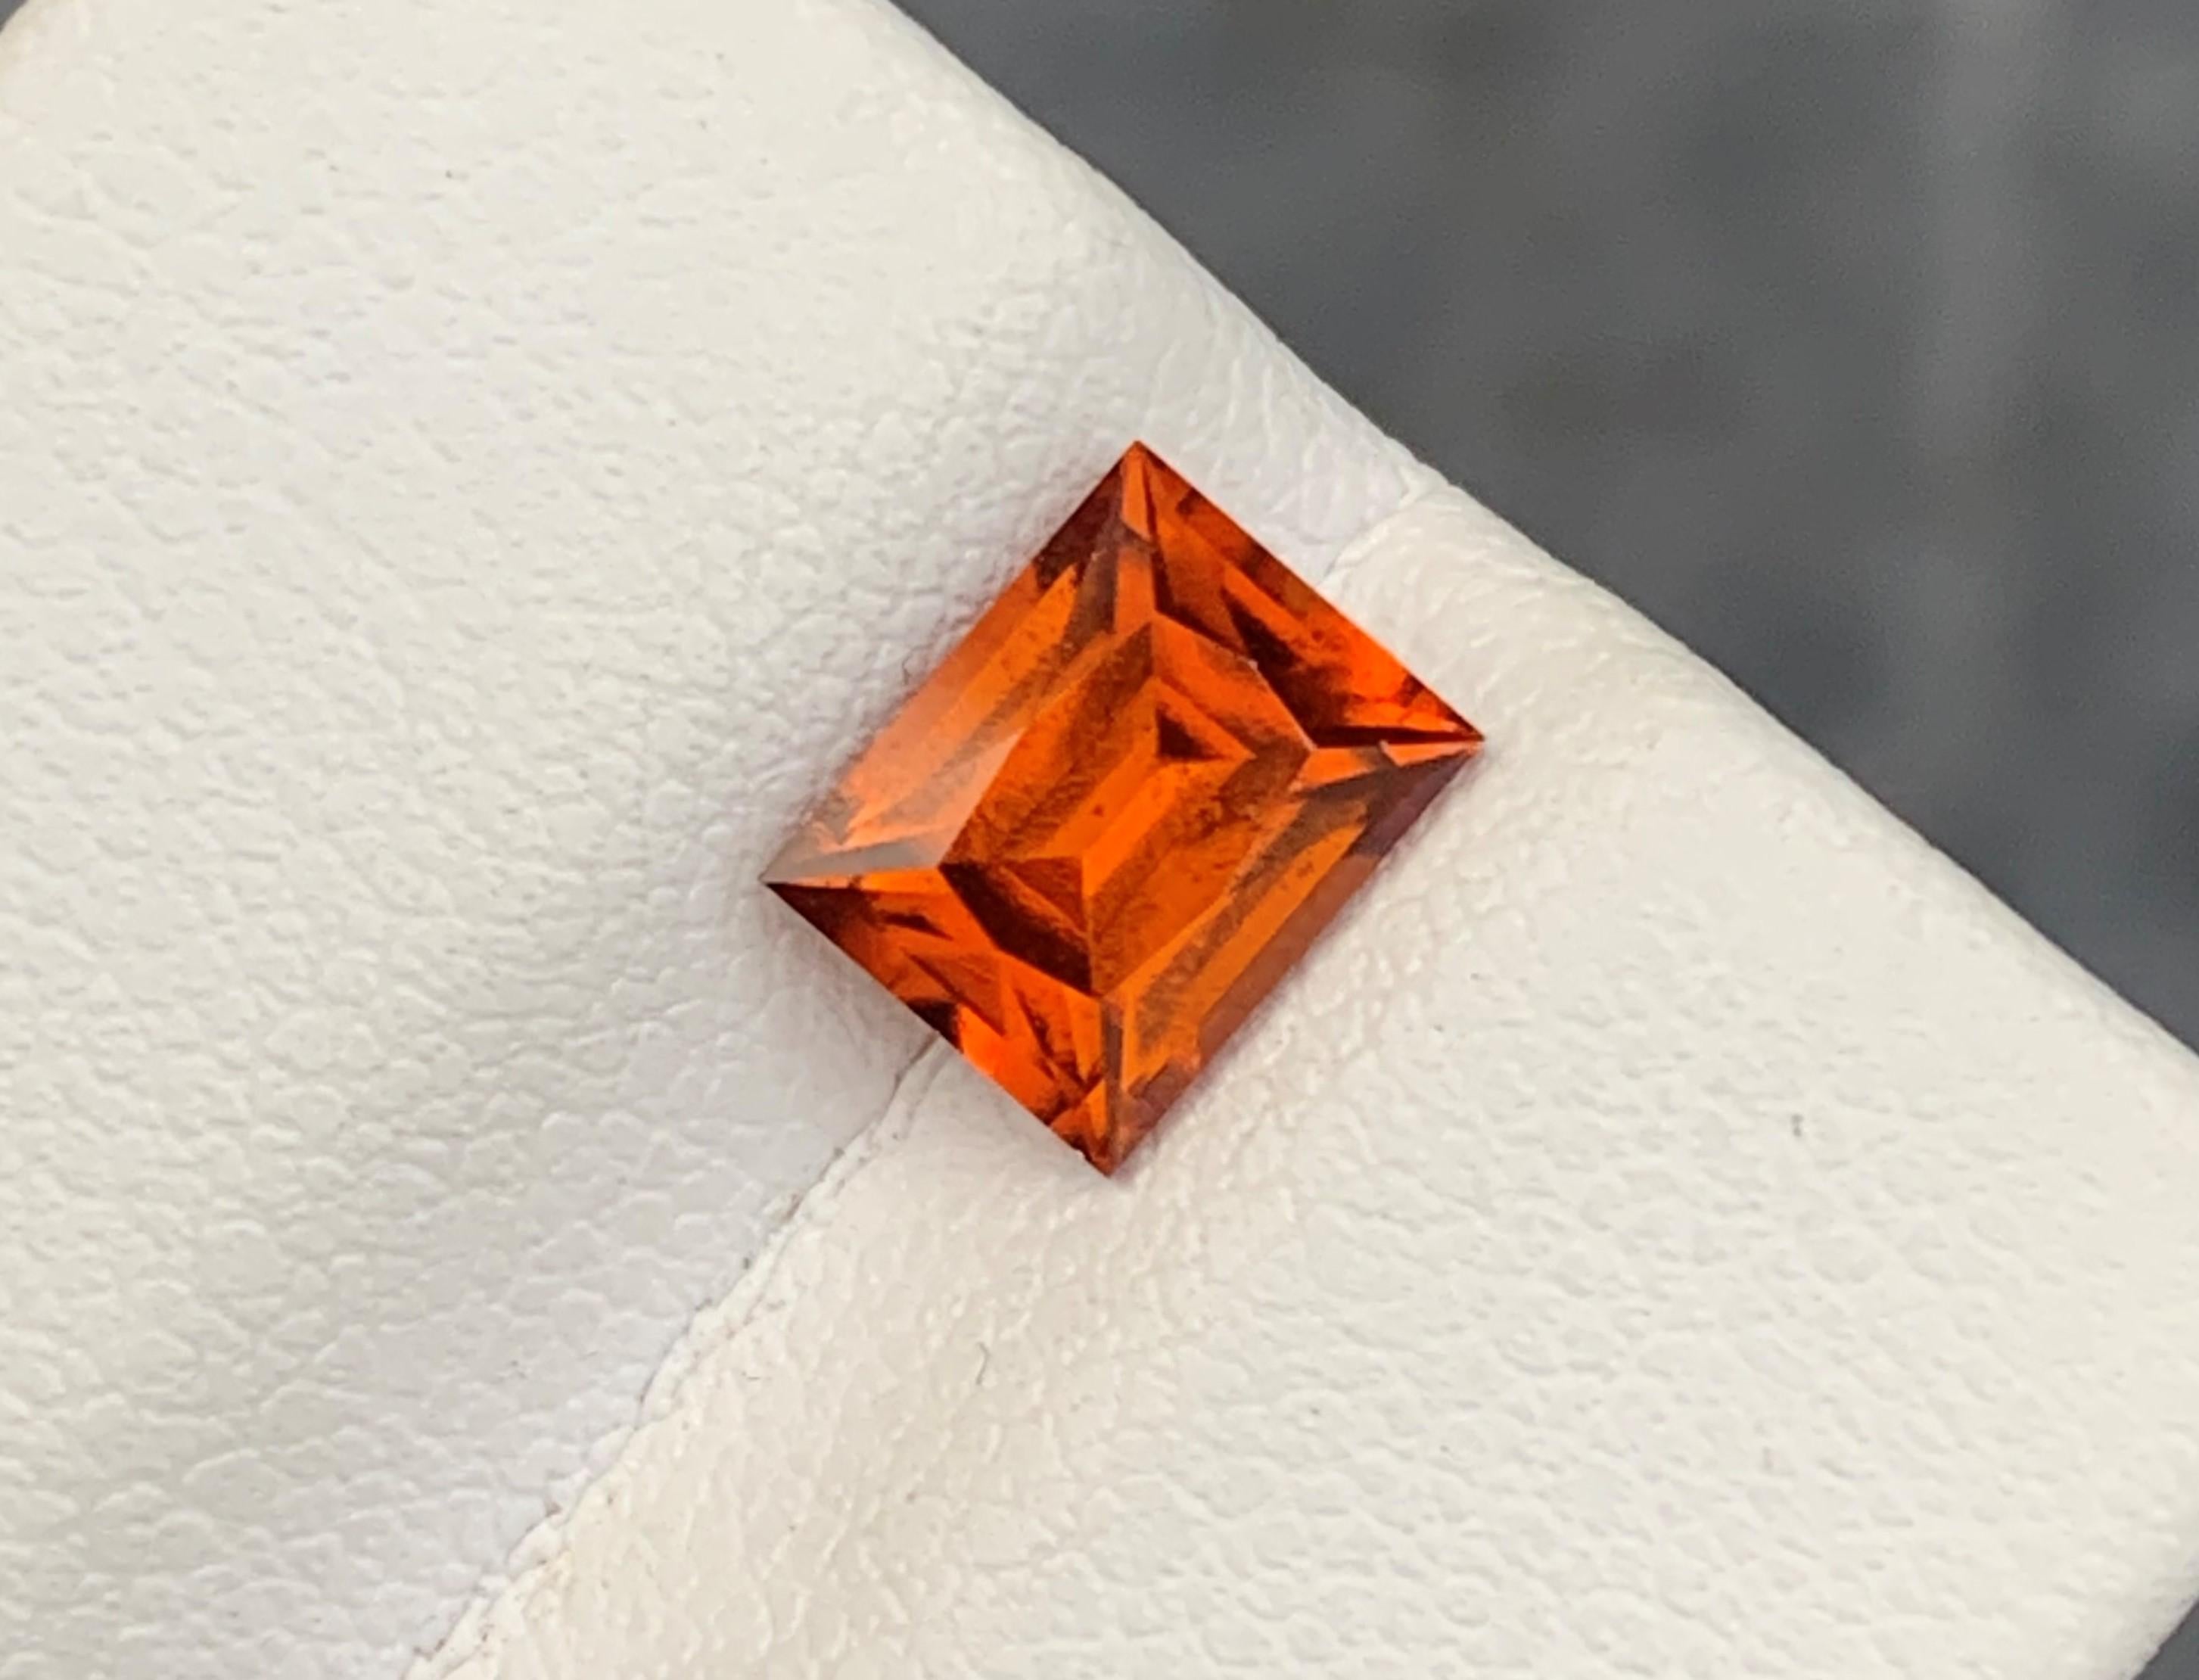 Gemstone Type : Hessonite Garnet
Weight : 1.70 Carats
Dimensions : 7.3x5.8x4.2 Mm
Origin : Africa
Clarity : Smoky Eye Clean
Shape: Baguette
Color: Orange
Certificate: On Demand
Birthstone: January Month
According to Vedic astrologists, wearing a